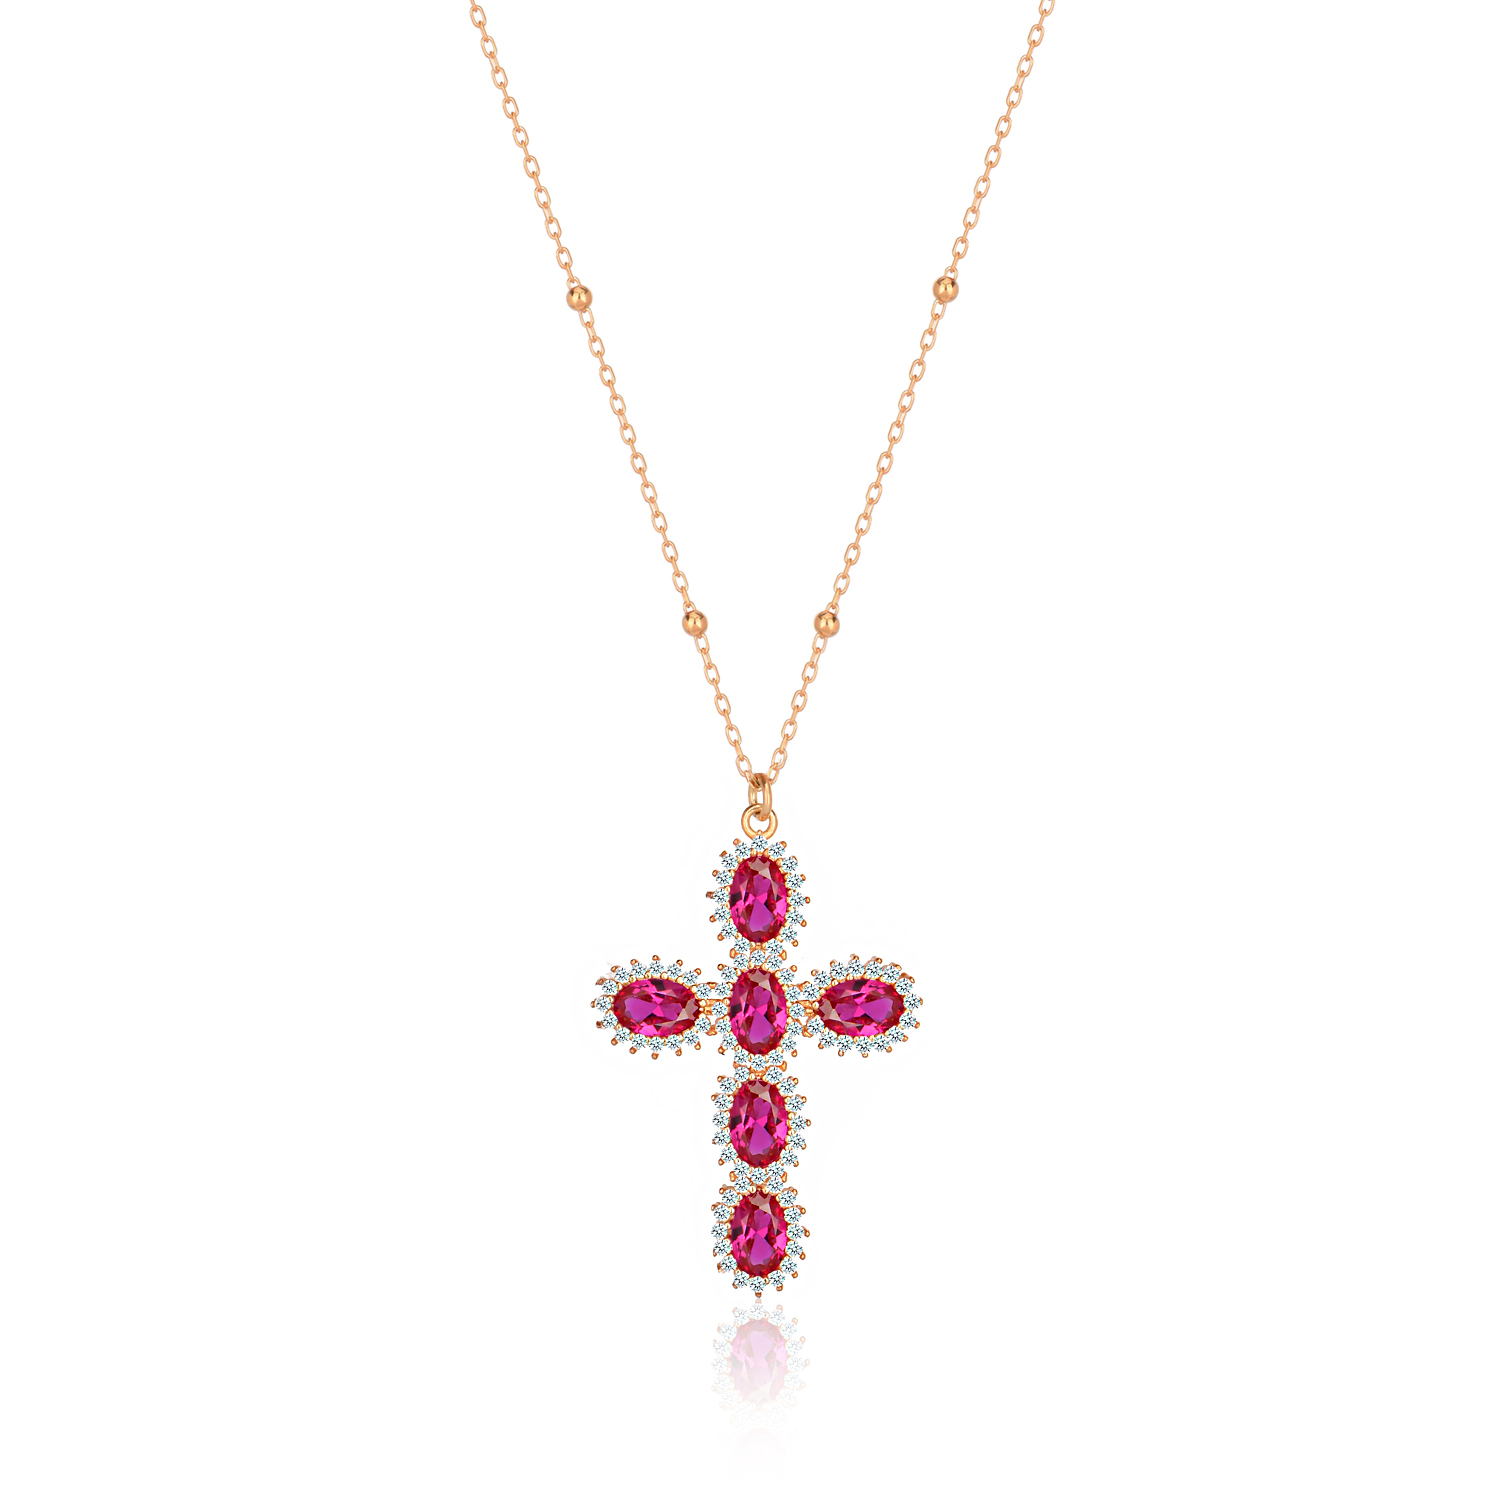 925-sterling-cross-necklace-with-cubic-zirkon